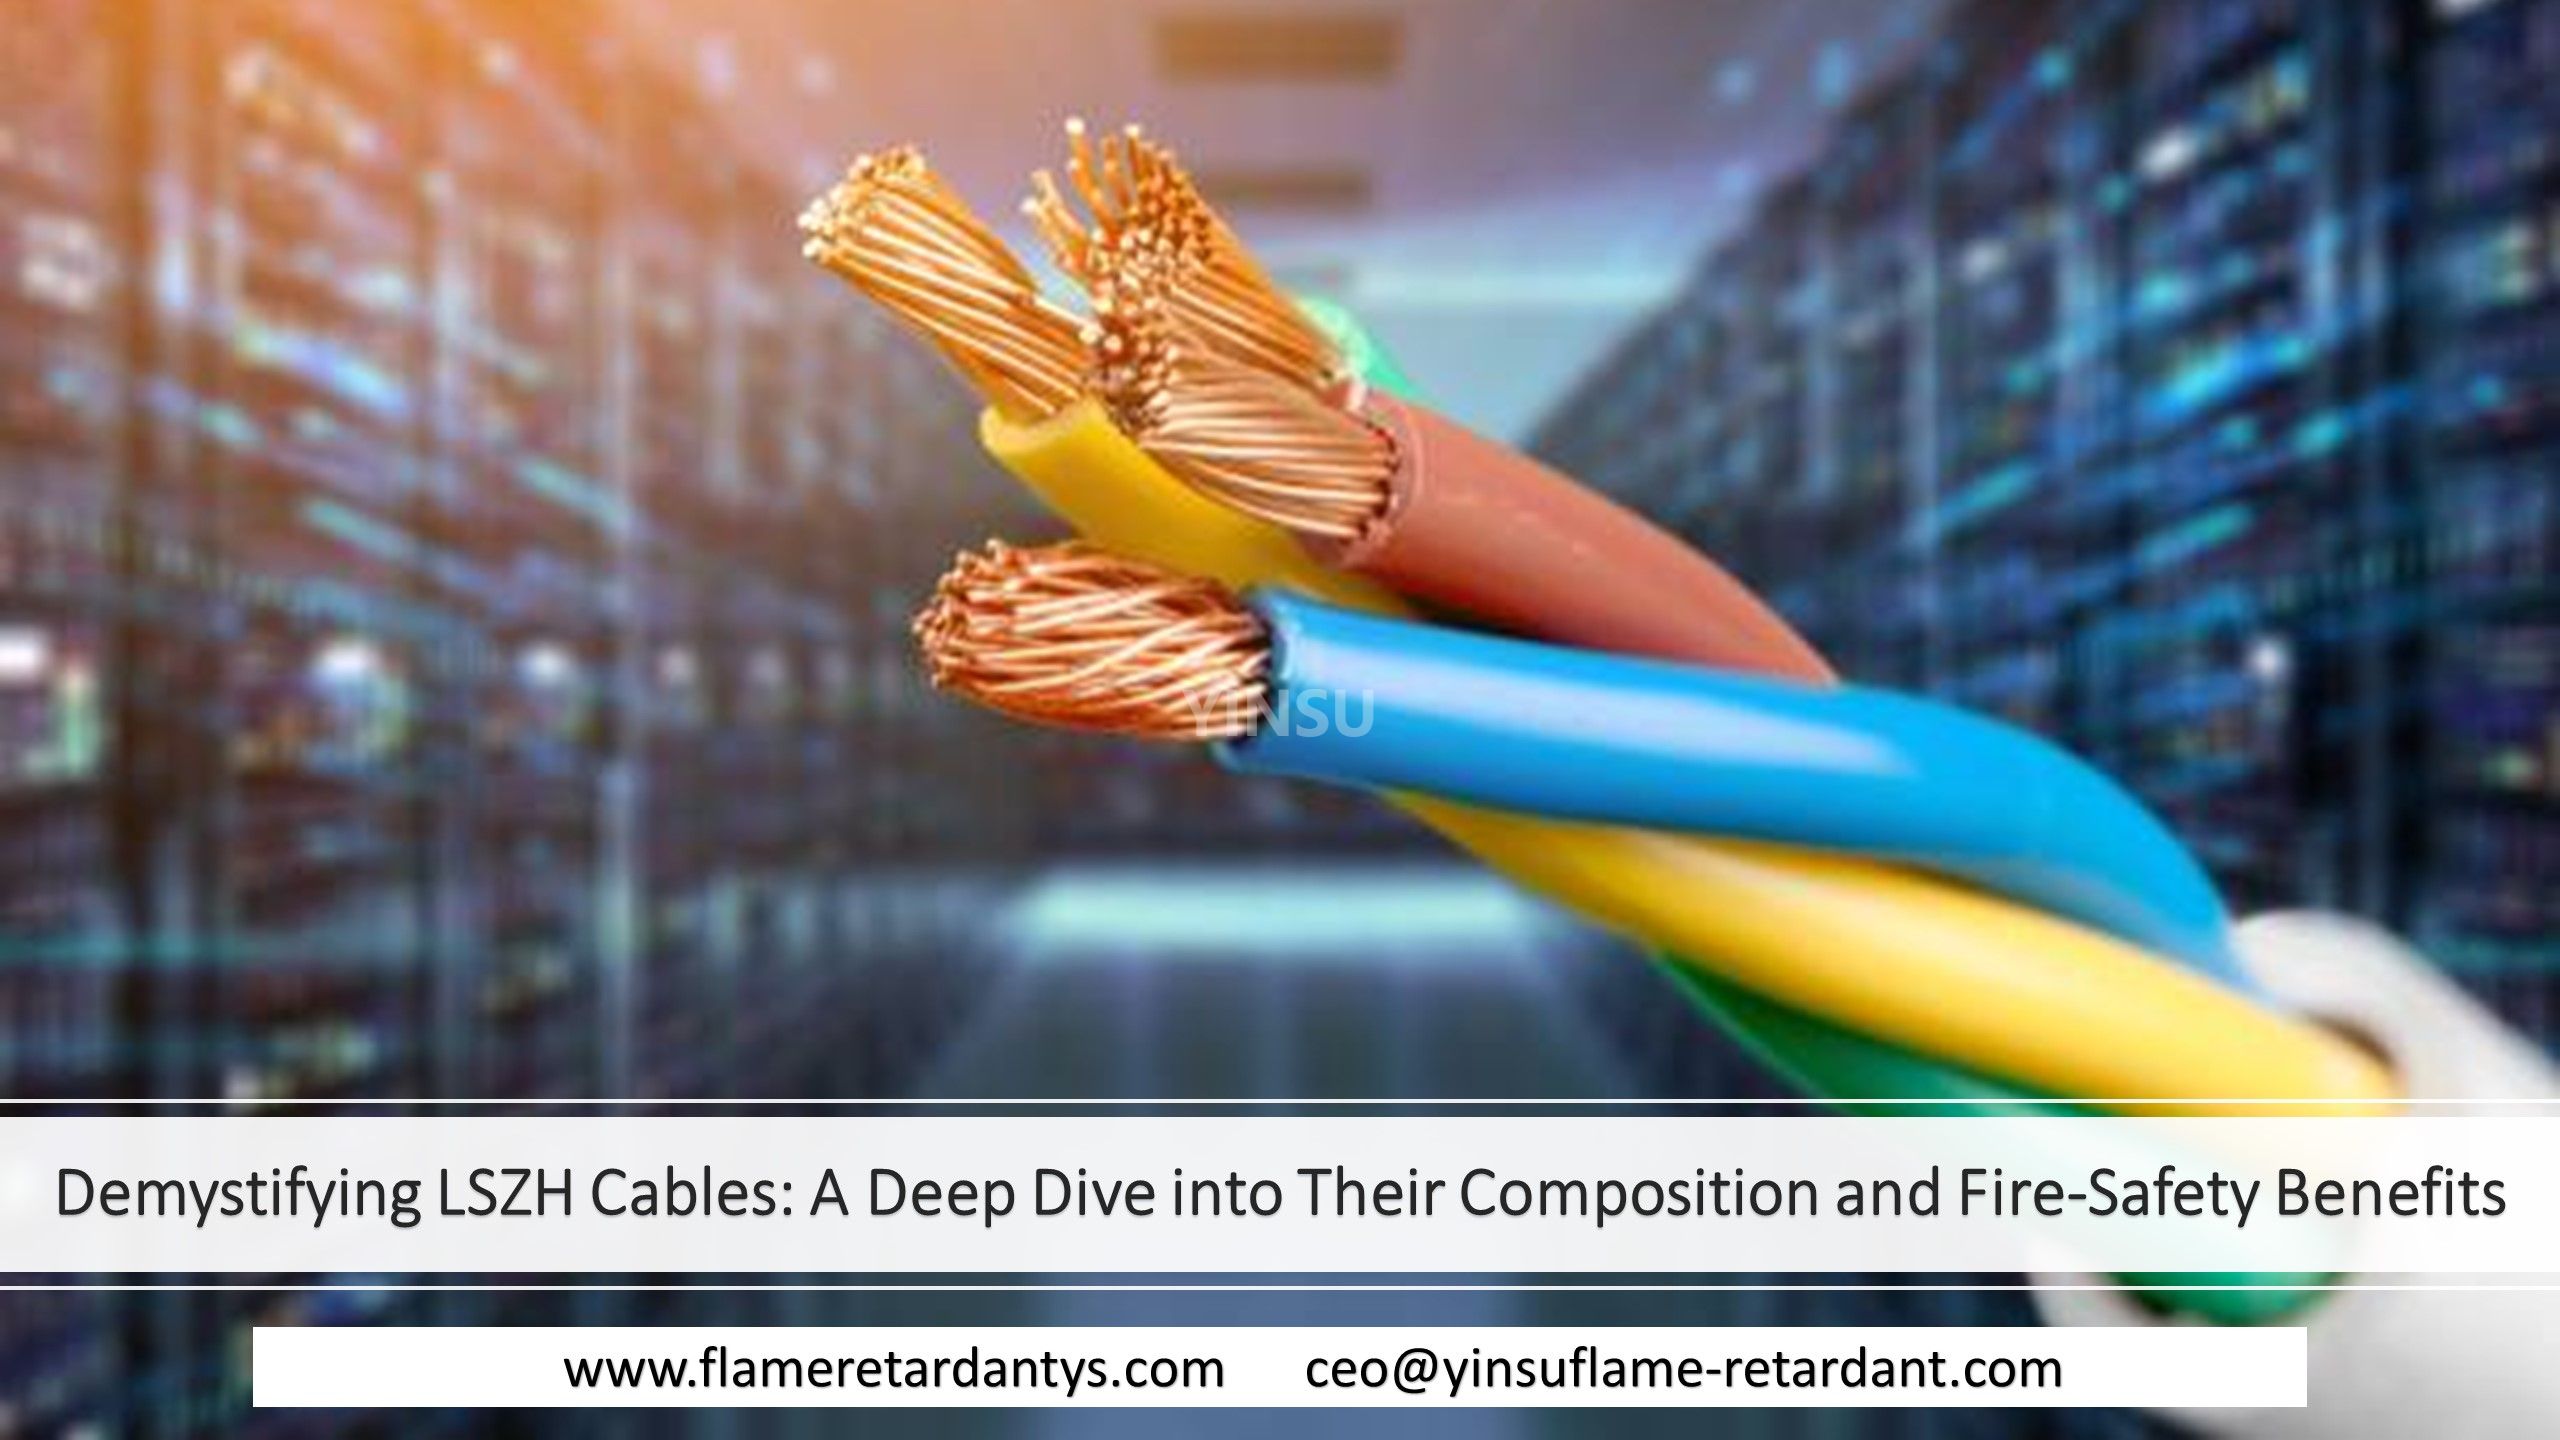 Demystifying LSZH Cables: A Deep Dive into Their Composition And Fire-Safety Benefits